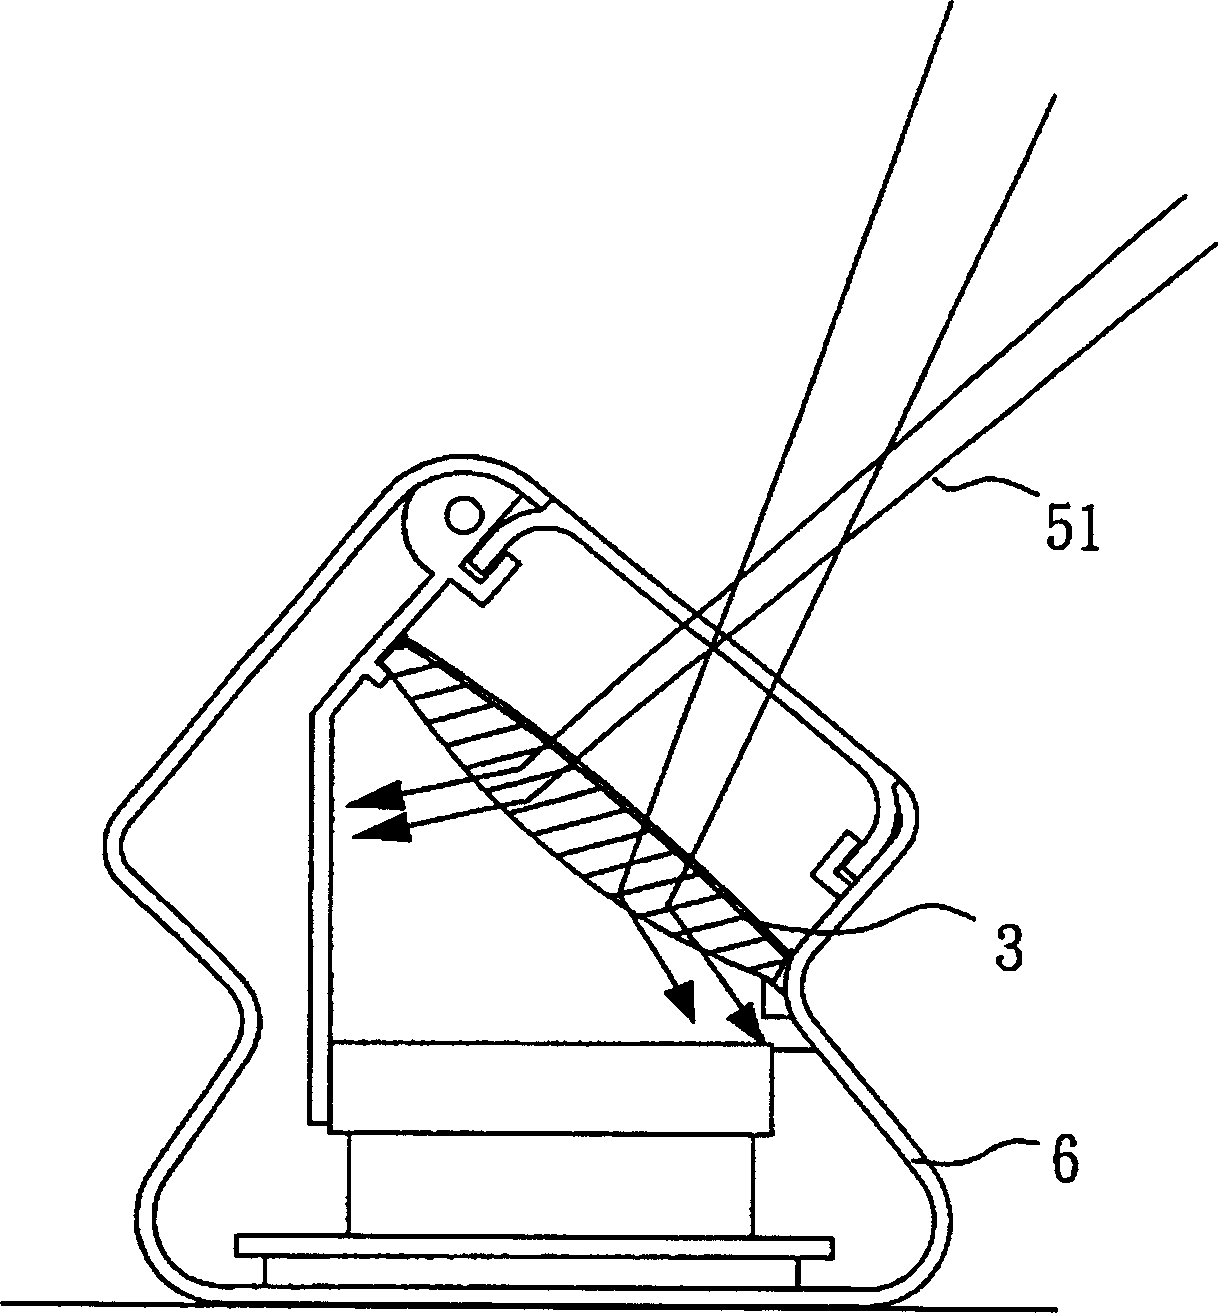 Refractive projecting unit possessing light filter